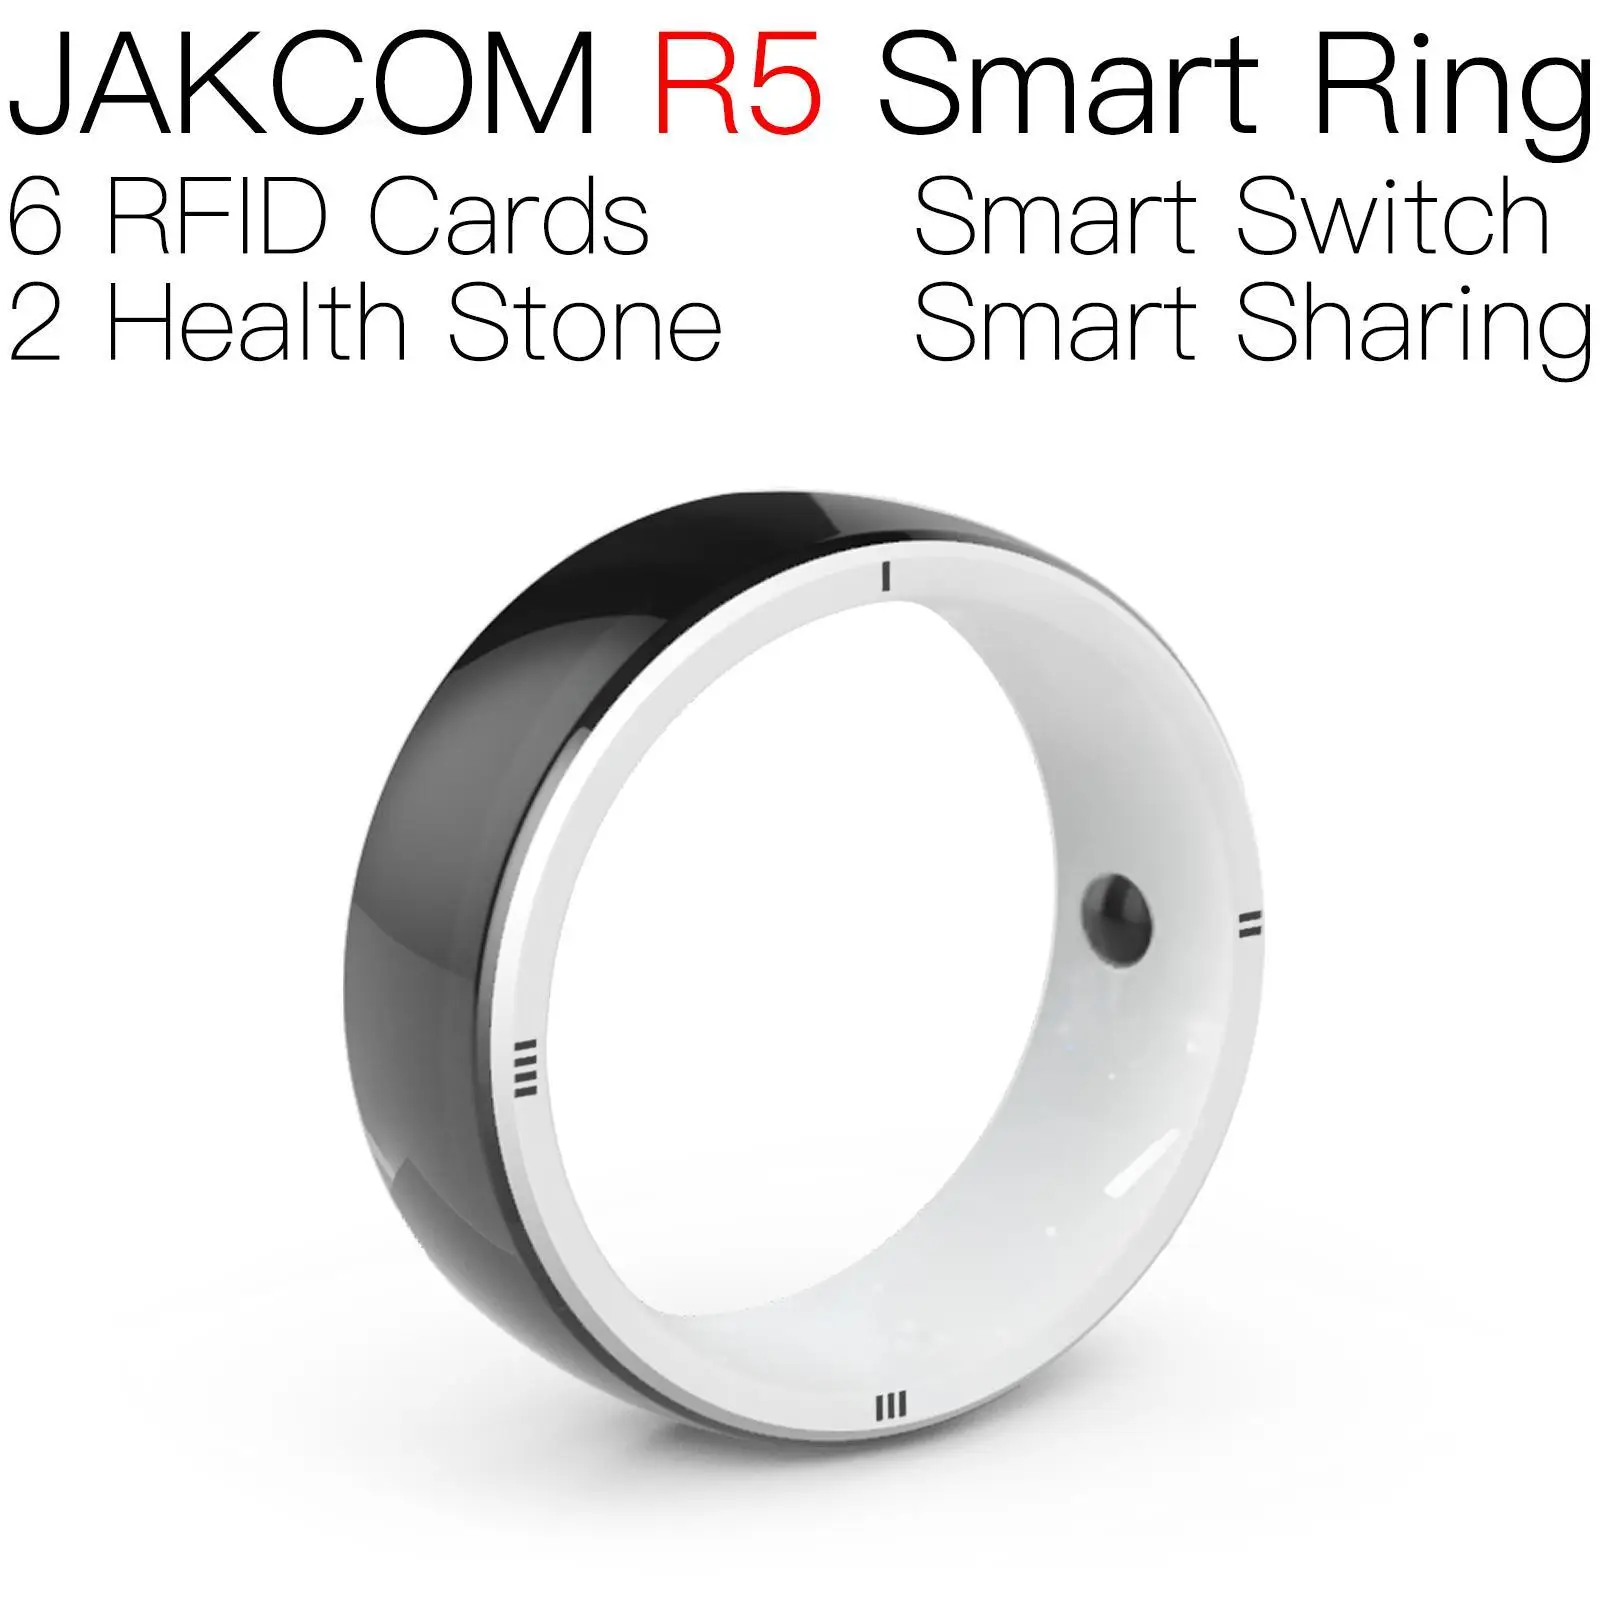 

JAKCOM R5 Smart Ring Nice than anti rfid card long range water proof nfc tags security badge mine tag switch with chip blanks